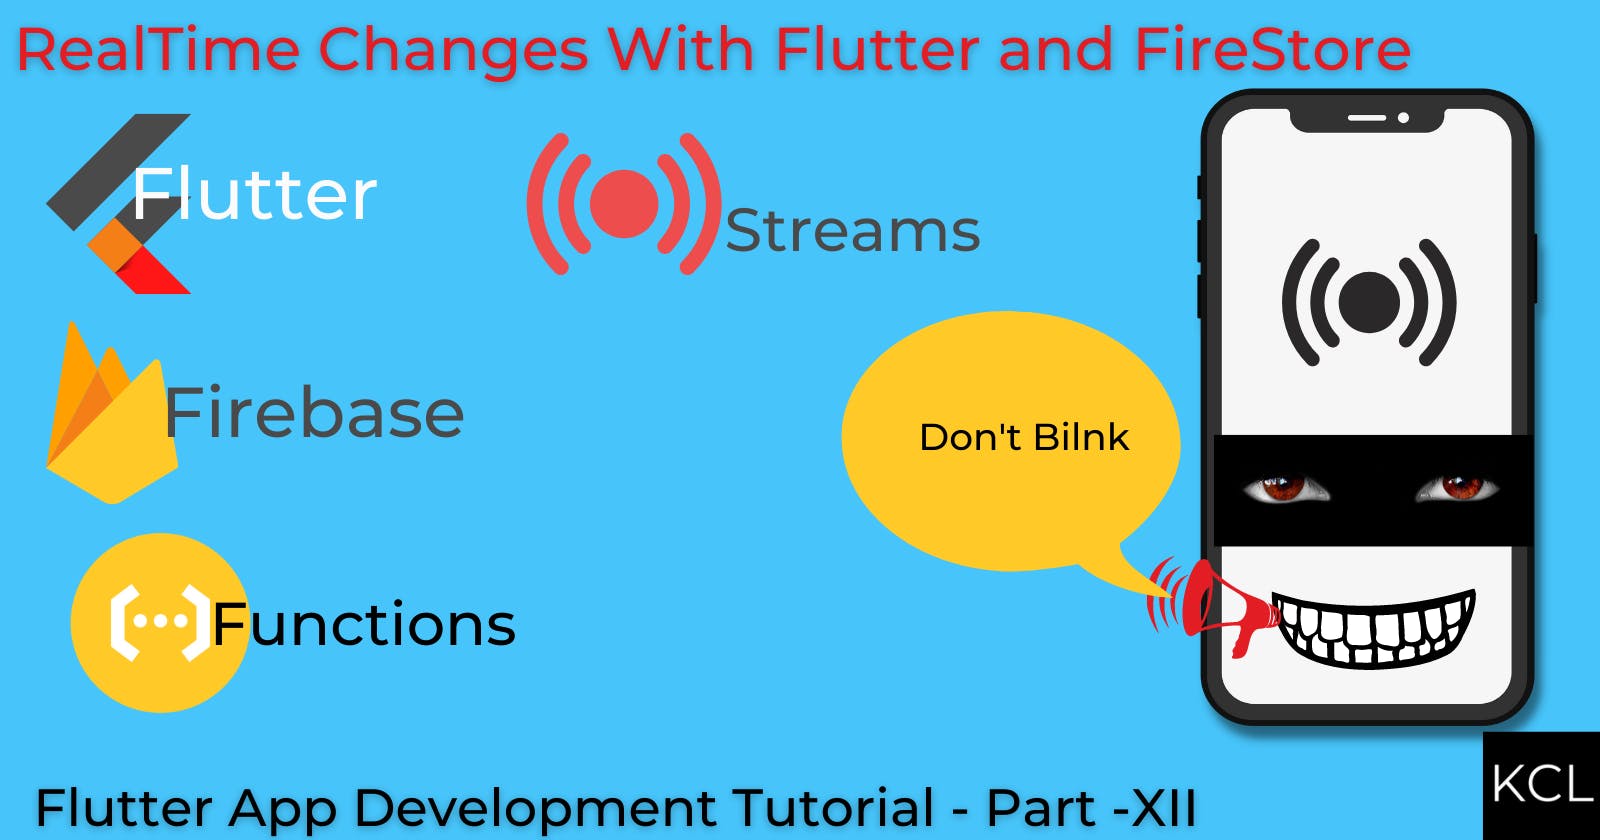 Real Time Changes With Flutter and Firebase